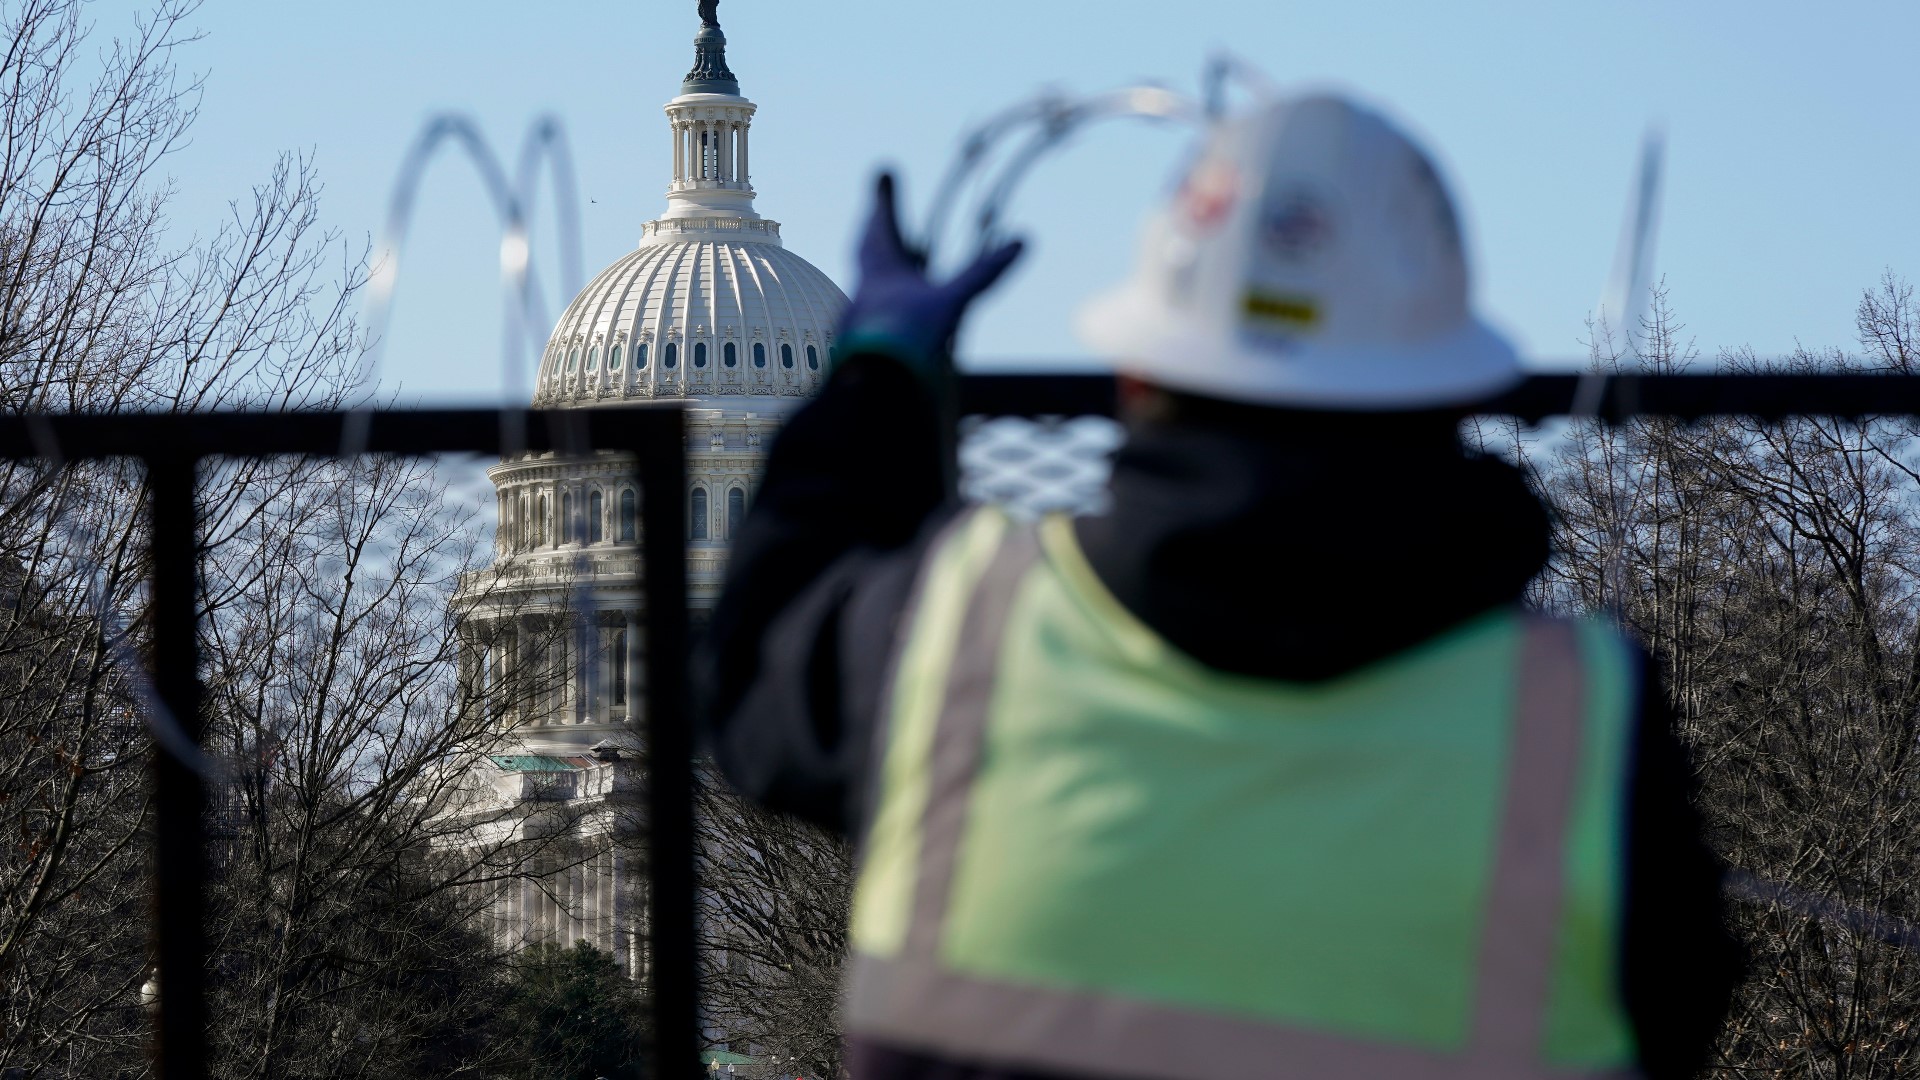 As the weeks wore on and the fencing stayed up, razor wire and steel came to represent a security overreach in the eyes of some in the Capitol Hill neighborhood.